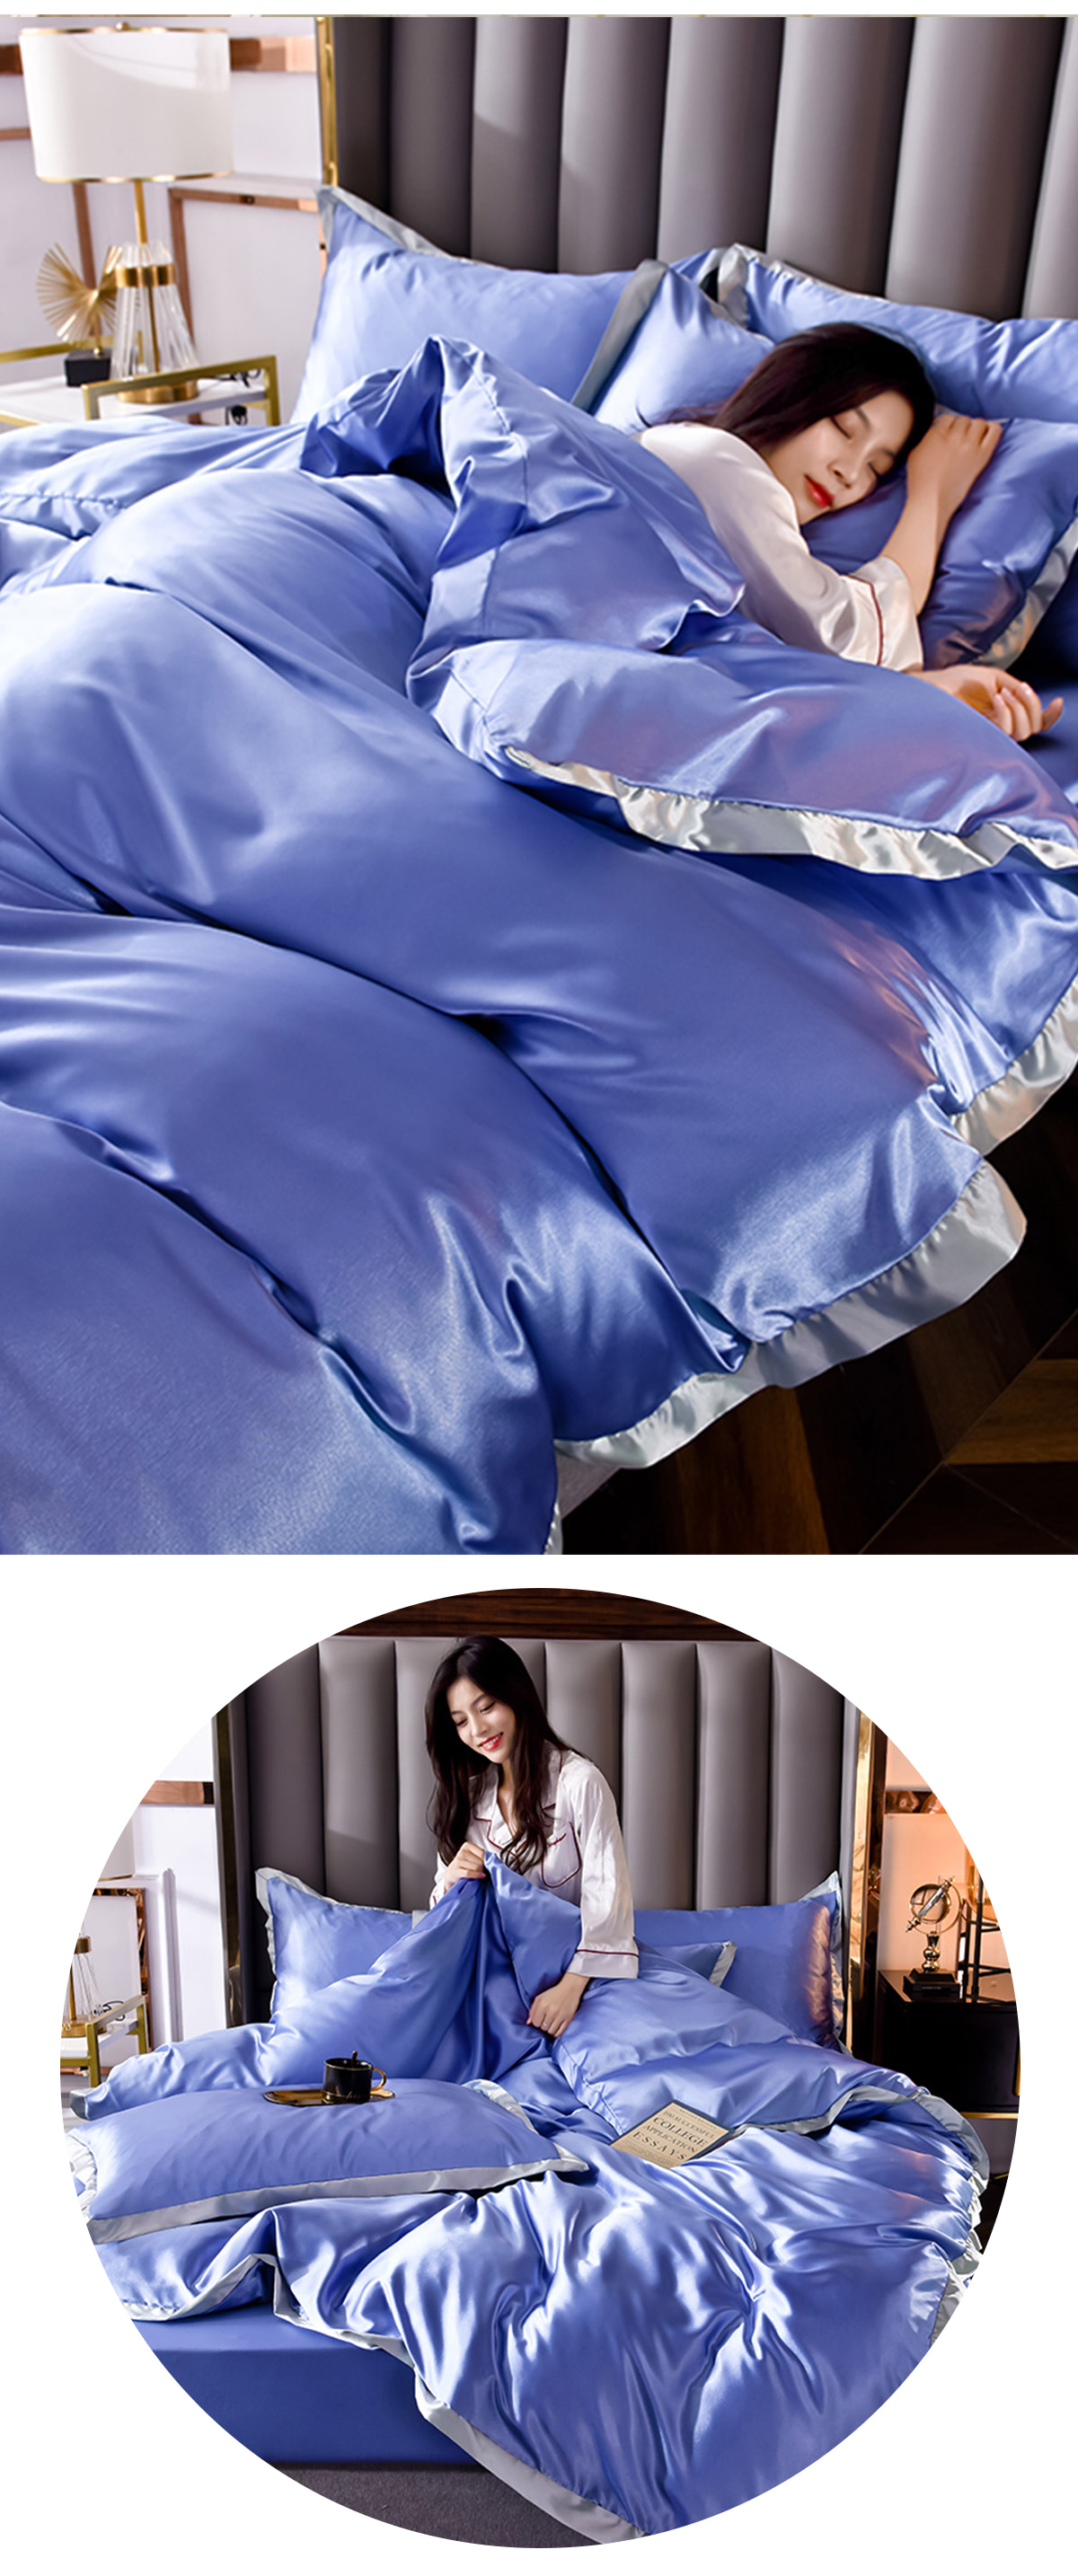 Fresh-and-Soft-Comfortable-Satin-Bed-Cover-Sheet-Set16.jpg